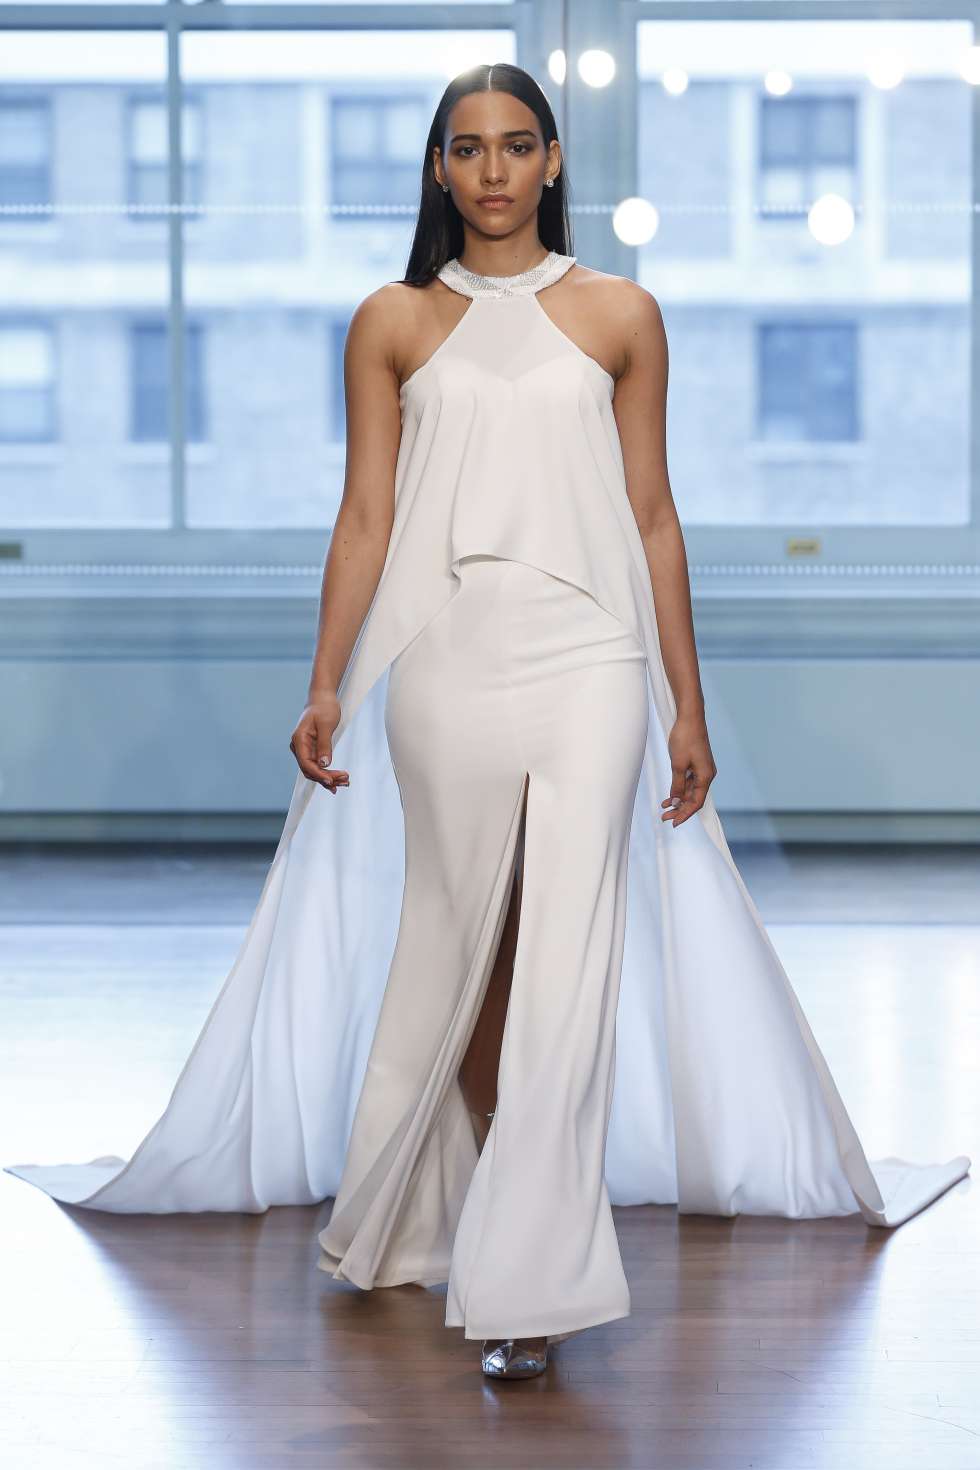 The 2019 Spring/Summer Wedding Dress Collection By Justin Alexander